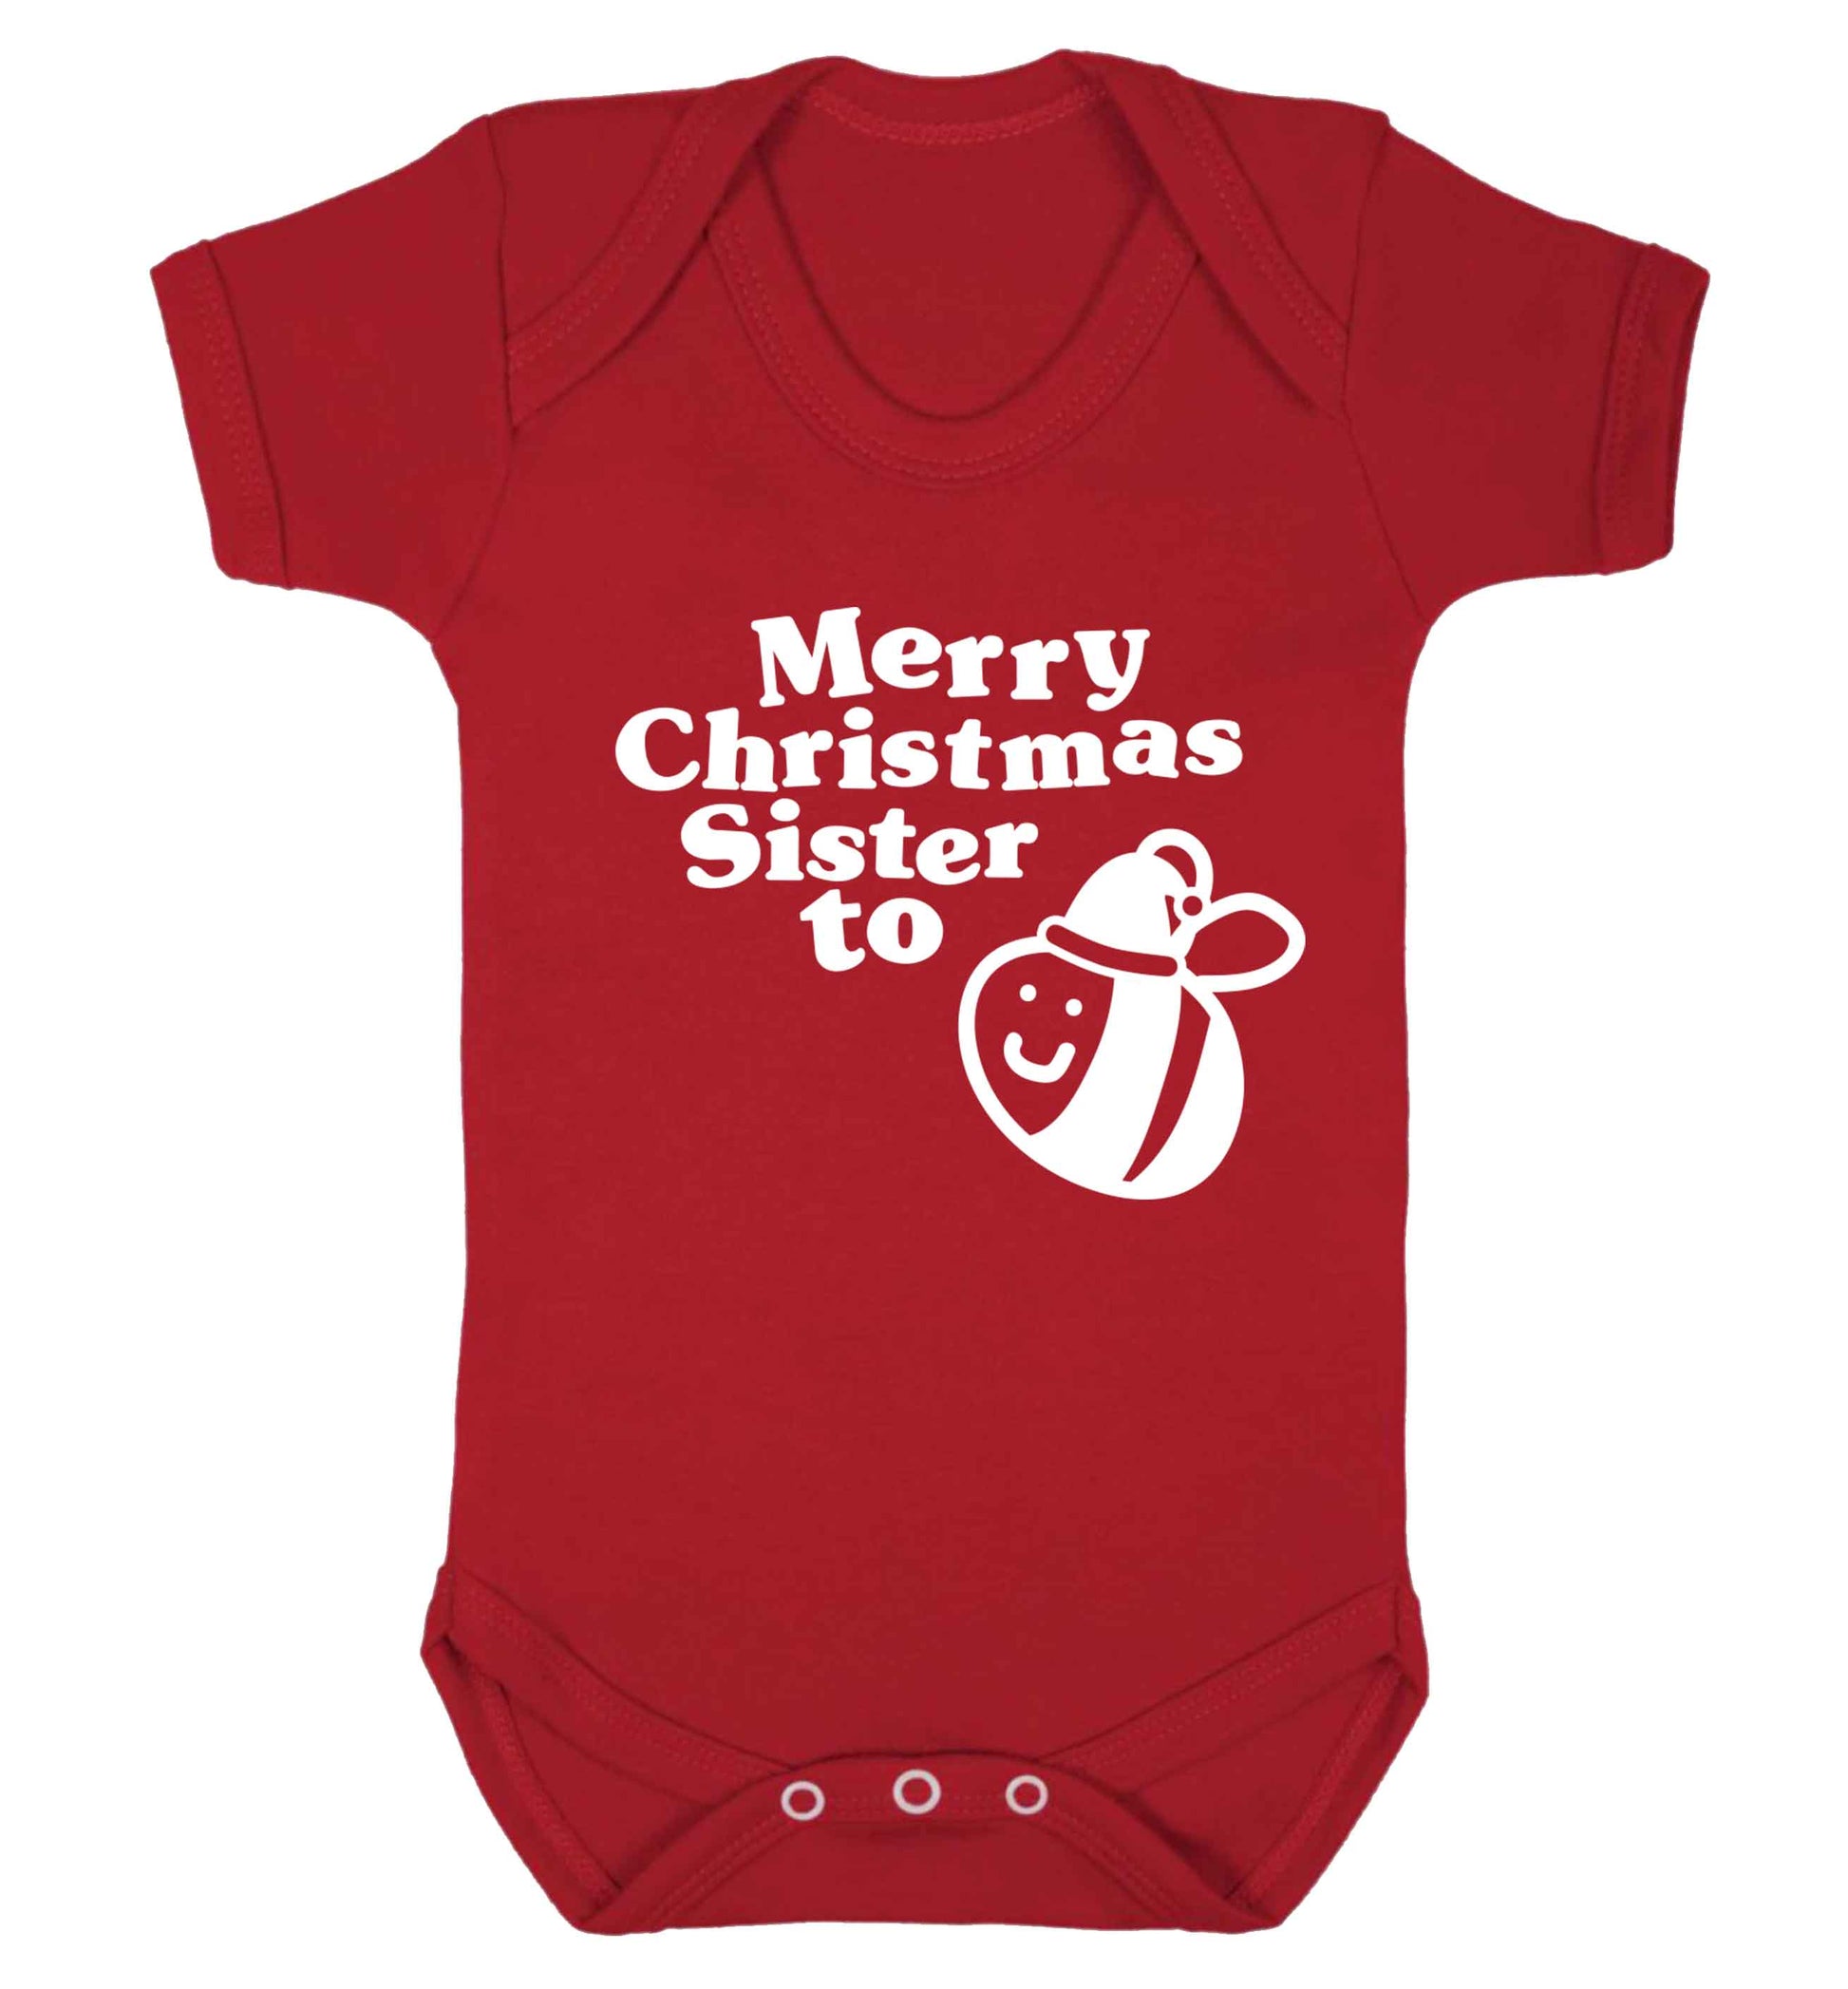 Merry Christmas sister to be Baby Vest red 18-24 months